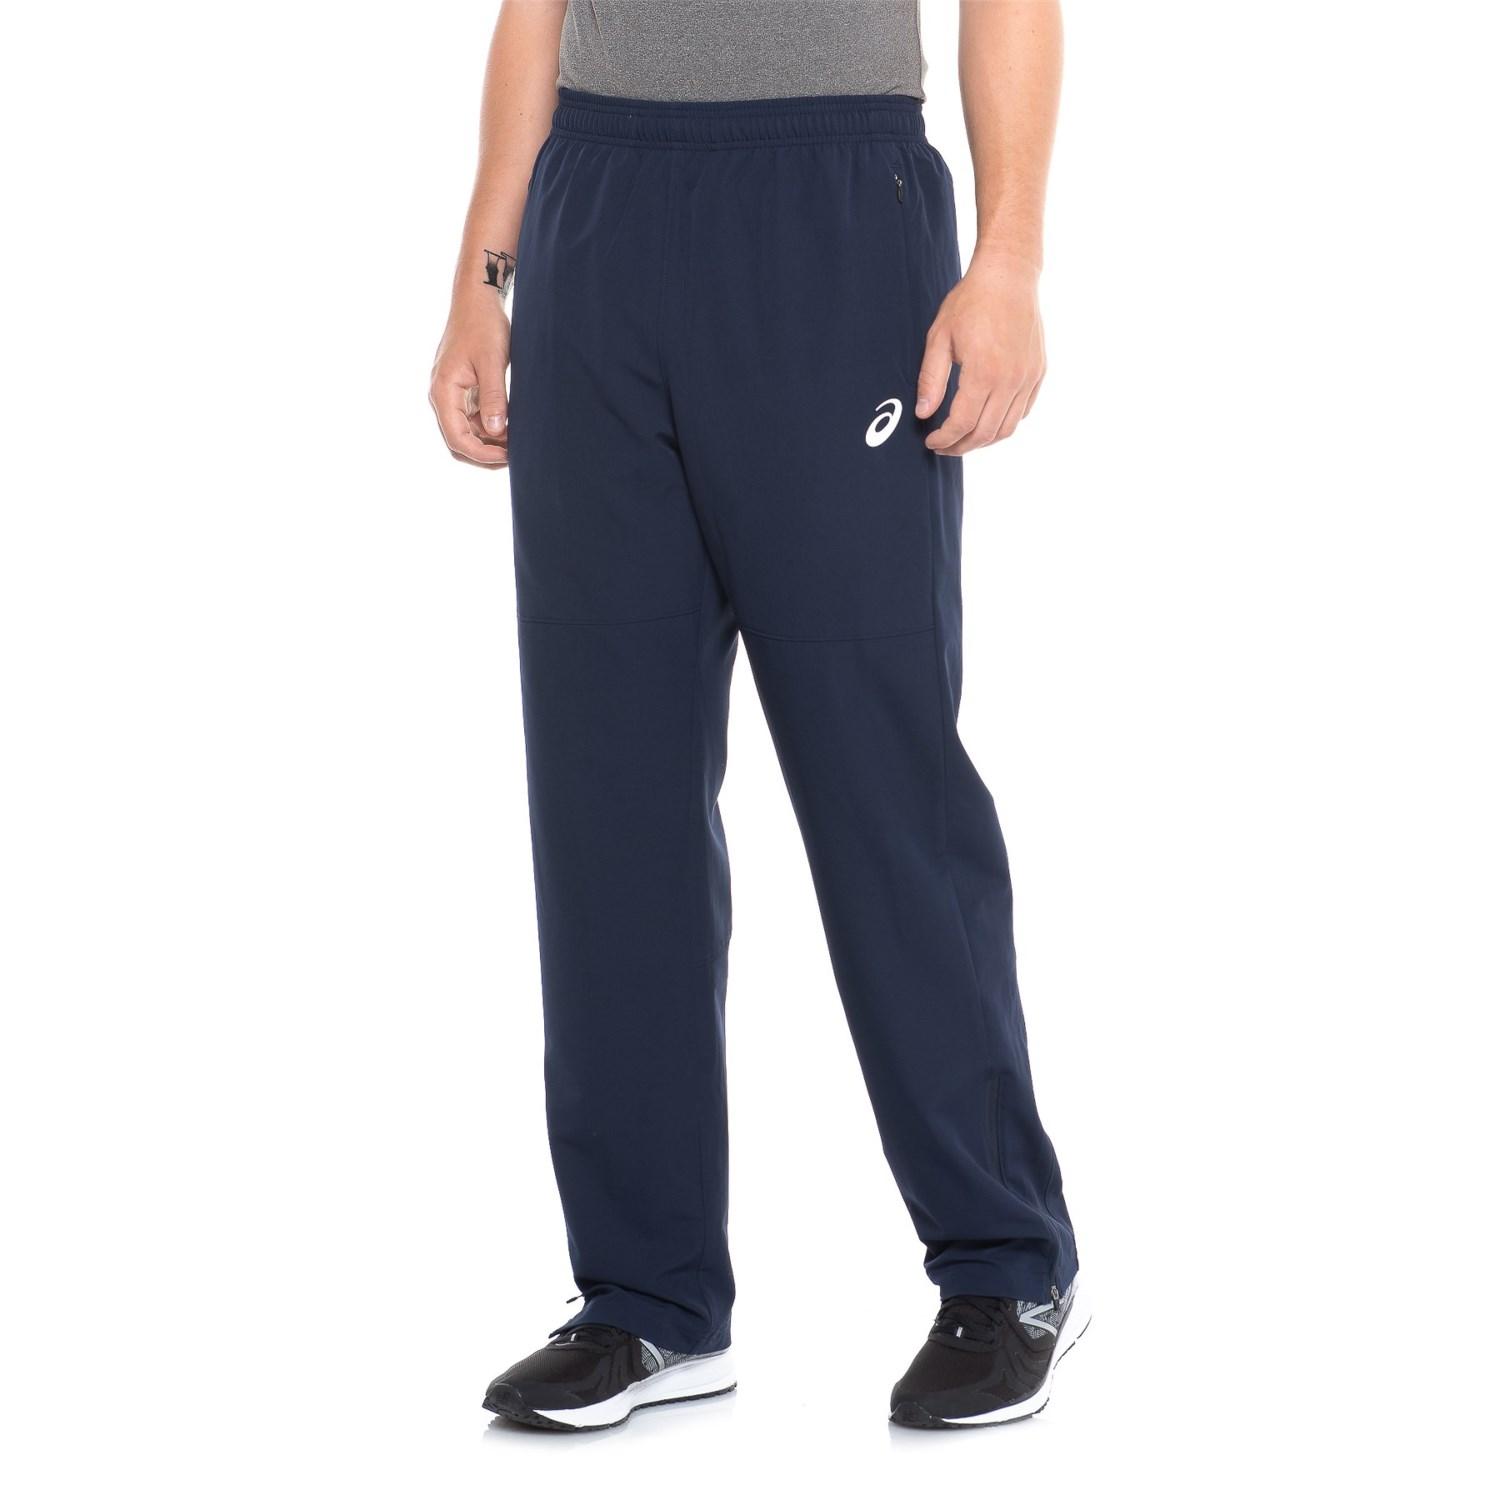 Asics Synthetic Team Battle Pants in 